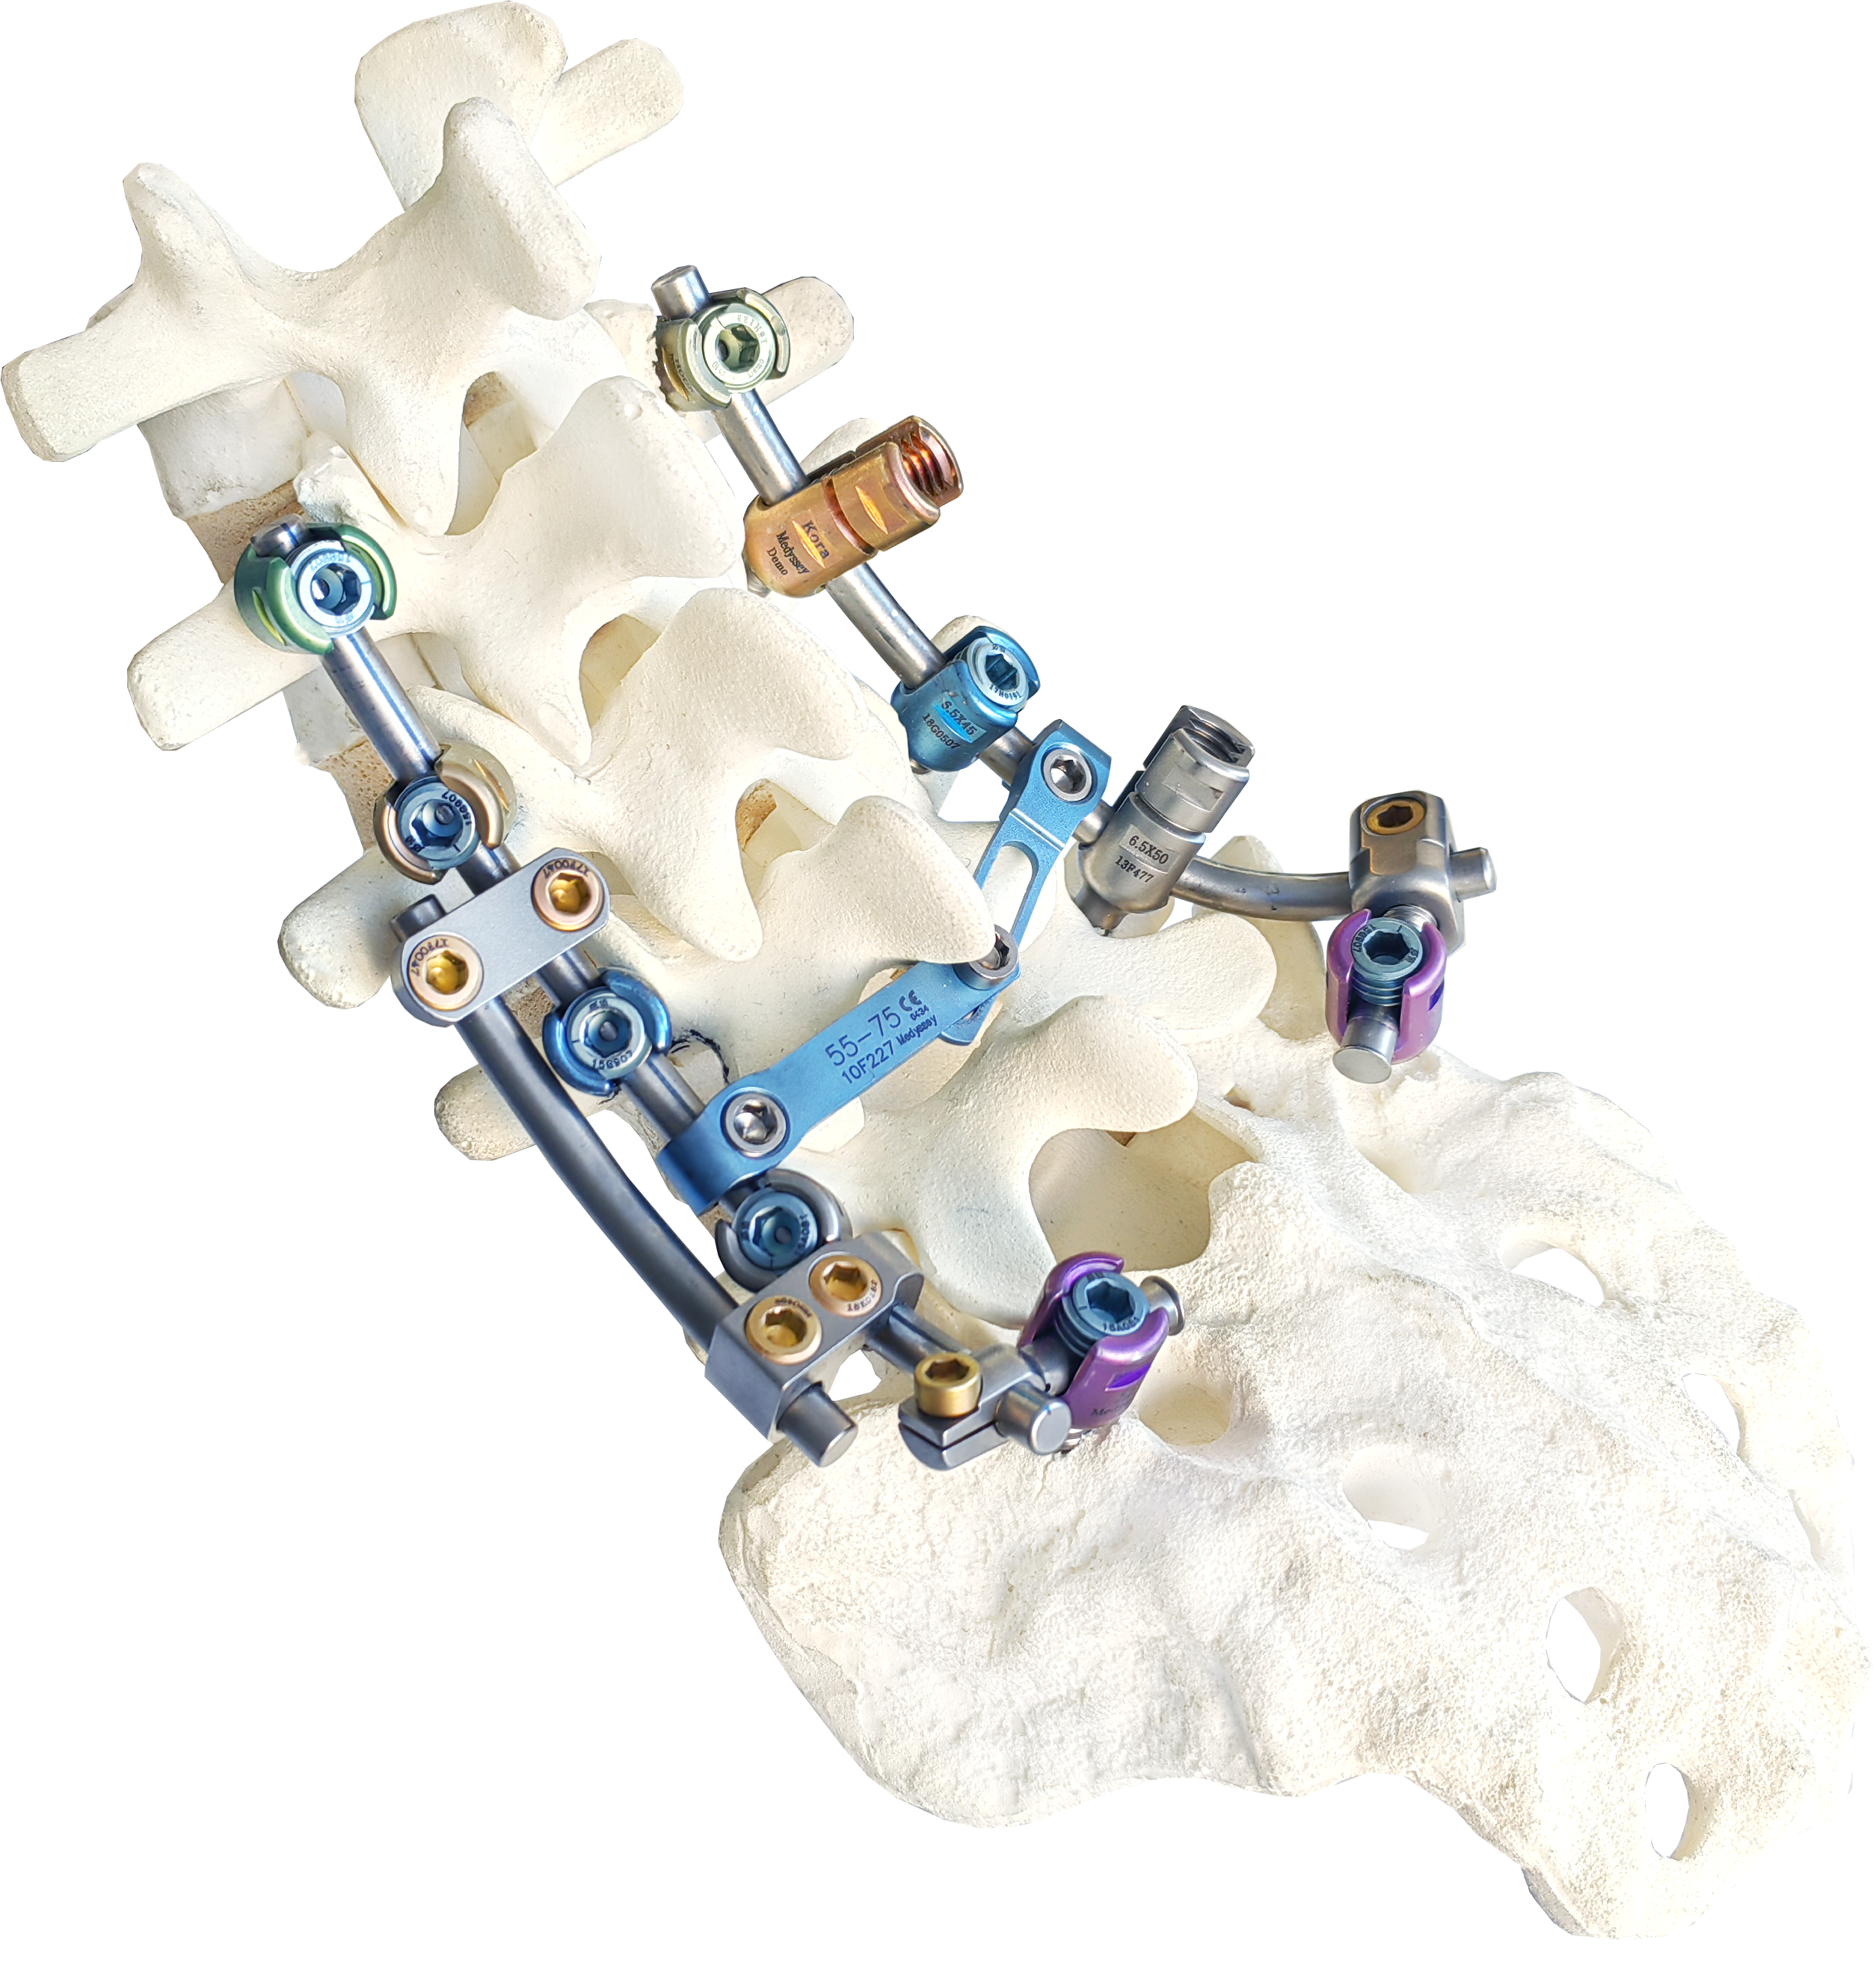 KORA (Medyssey) spinal fixation system provides the simplest and comprehensive stabilization solutions for spinal fixation.